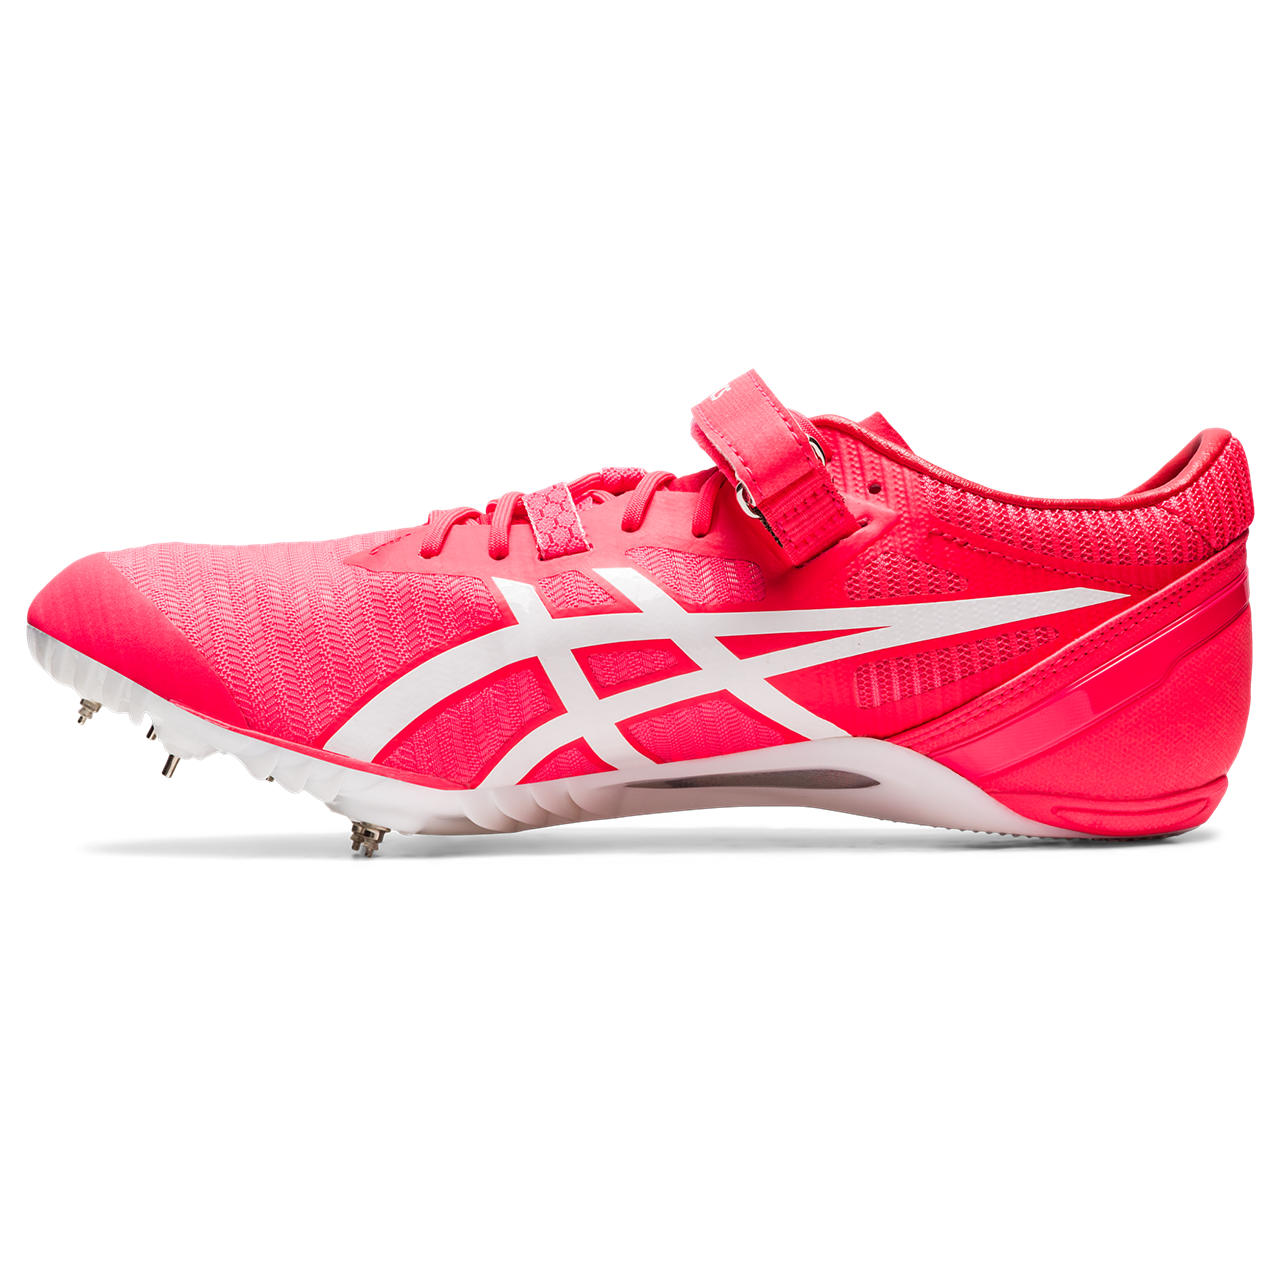 ASICS SP BLADE 9 image number null